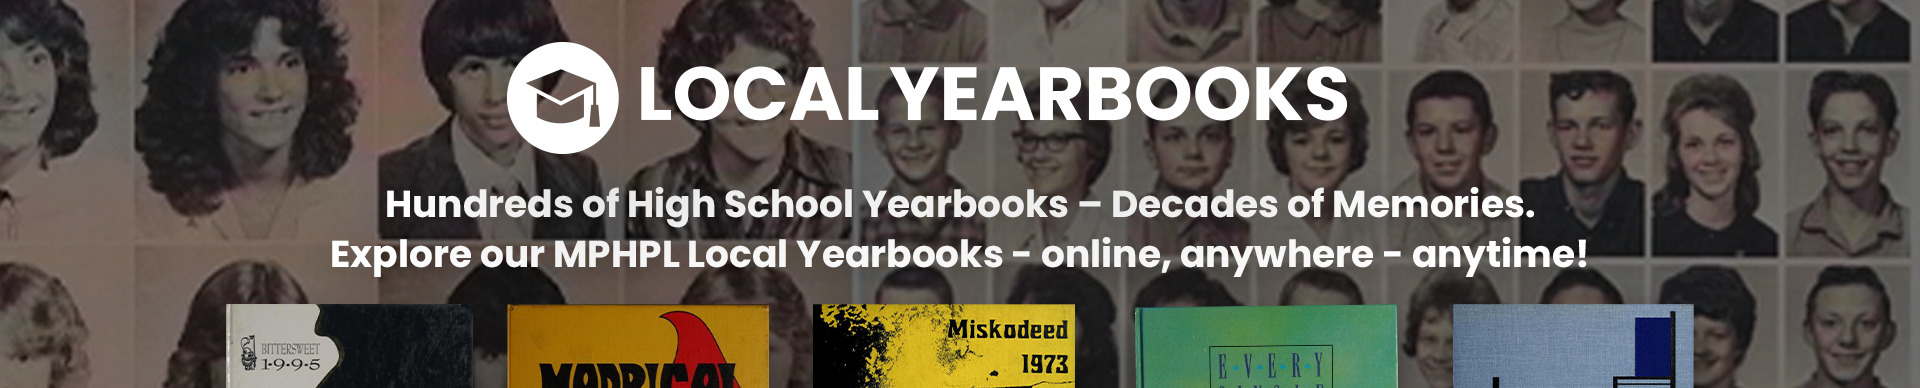 Local Yearbooks Hundres of High School Yearbooks - Decades of Memories Explore our MPHPL Local Yearbooks - online, anywhere - anytime! 